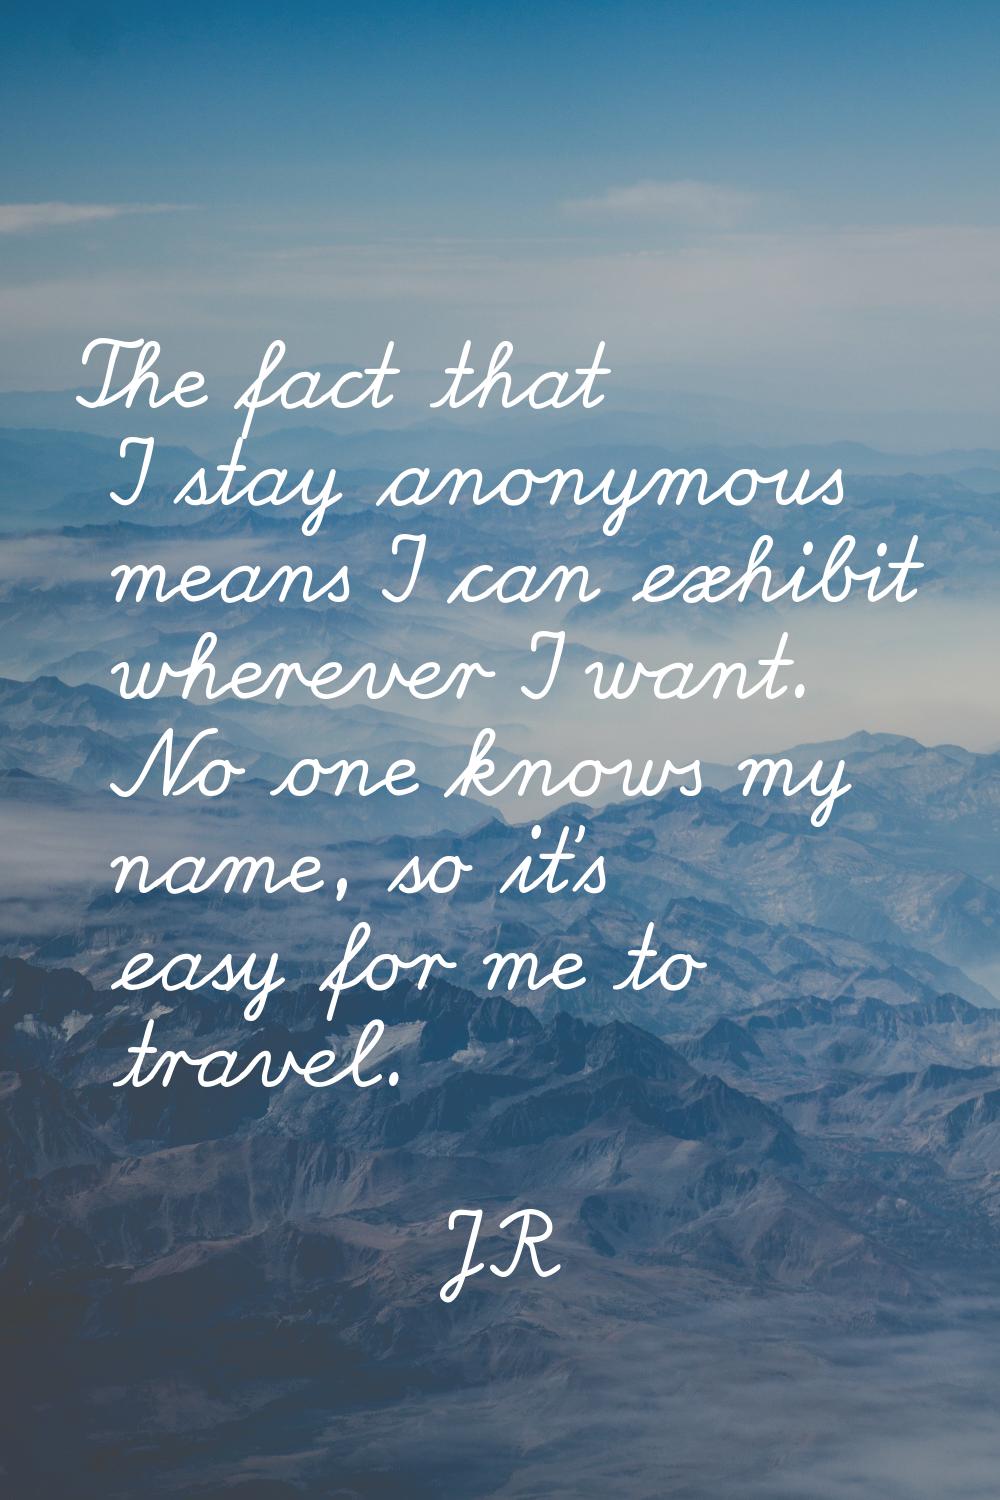 The fact that I stay anonymous means I can exhibit wherever I want. No one knows my name, so it's e